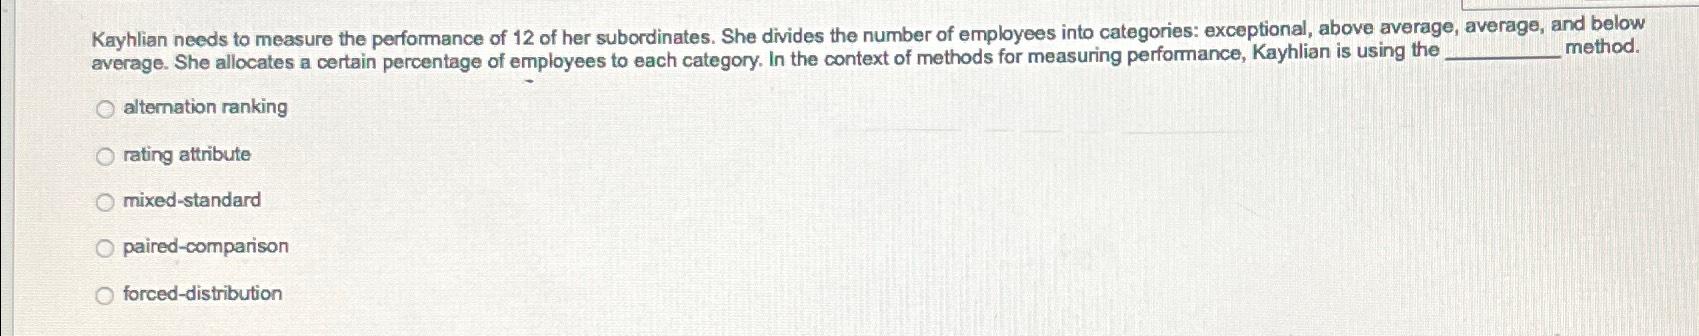 average. She allocates a certain percentage of employees to each category. In the context of methods for